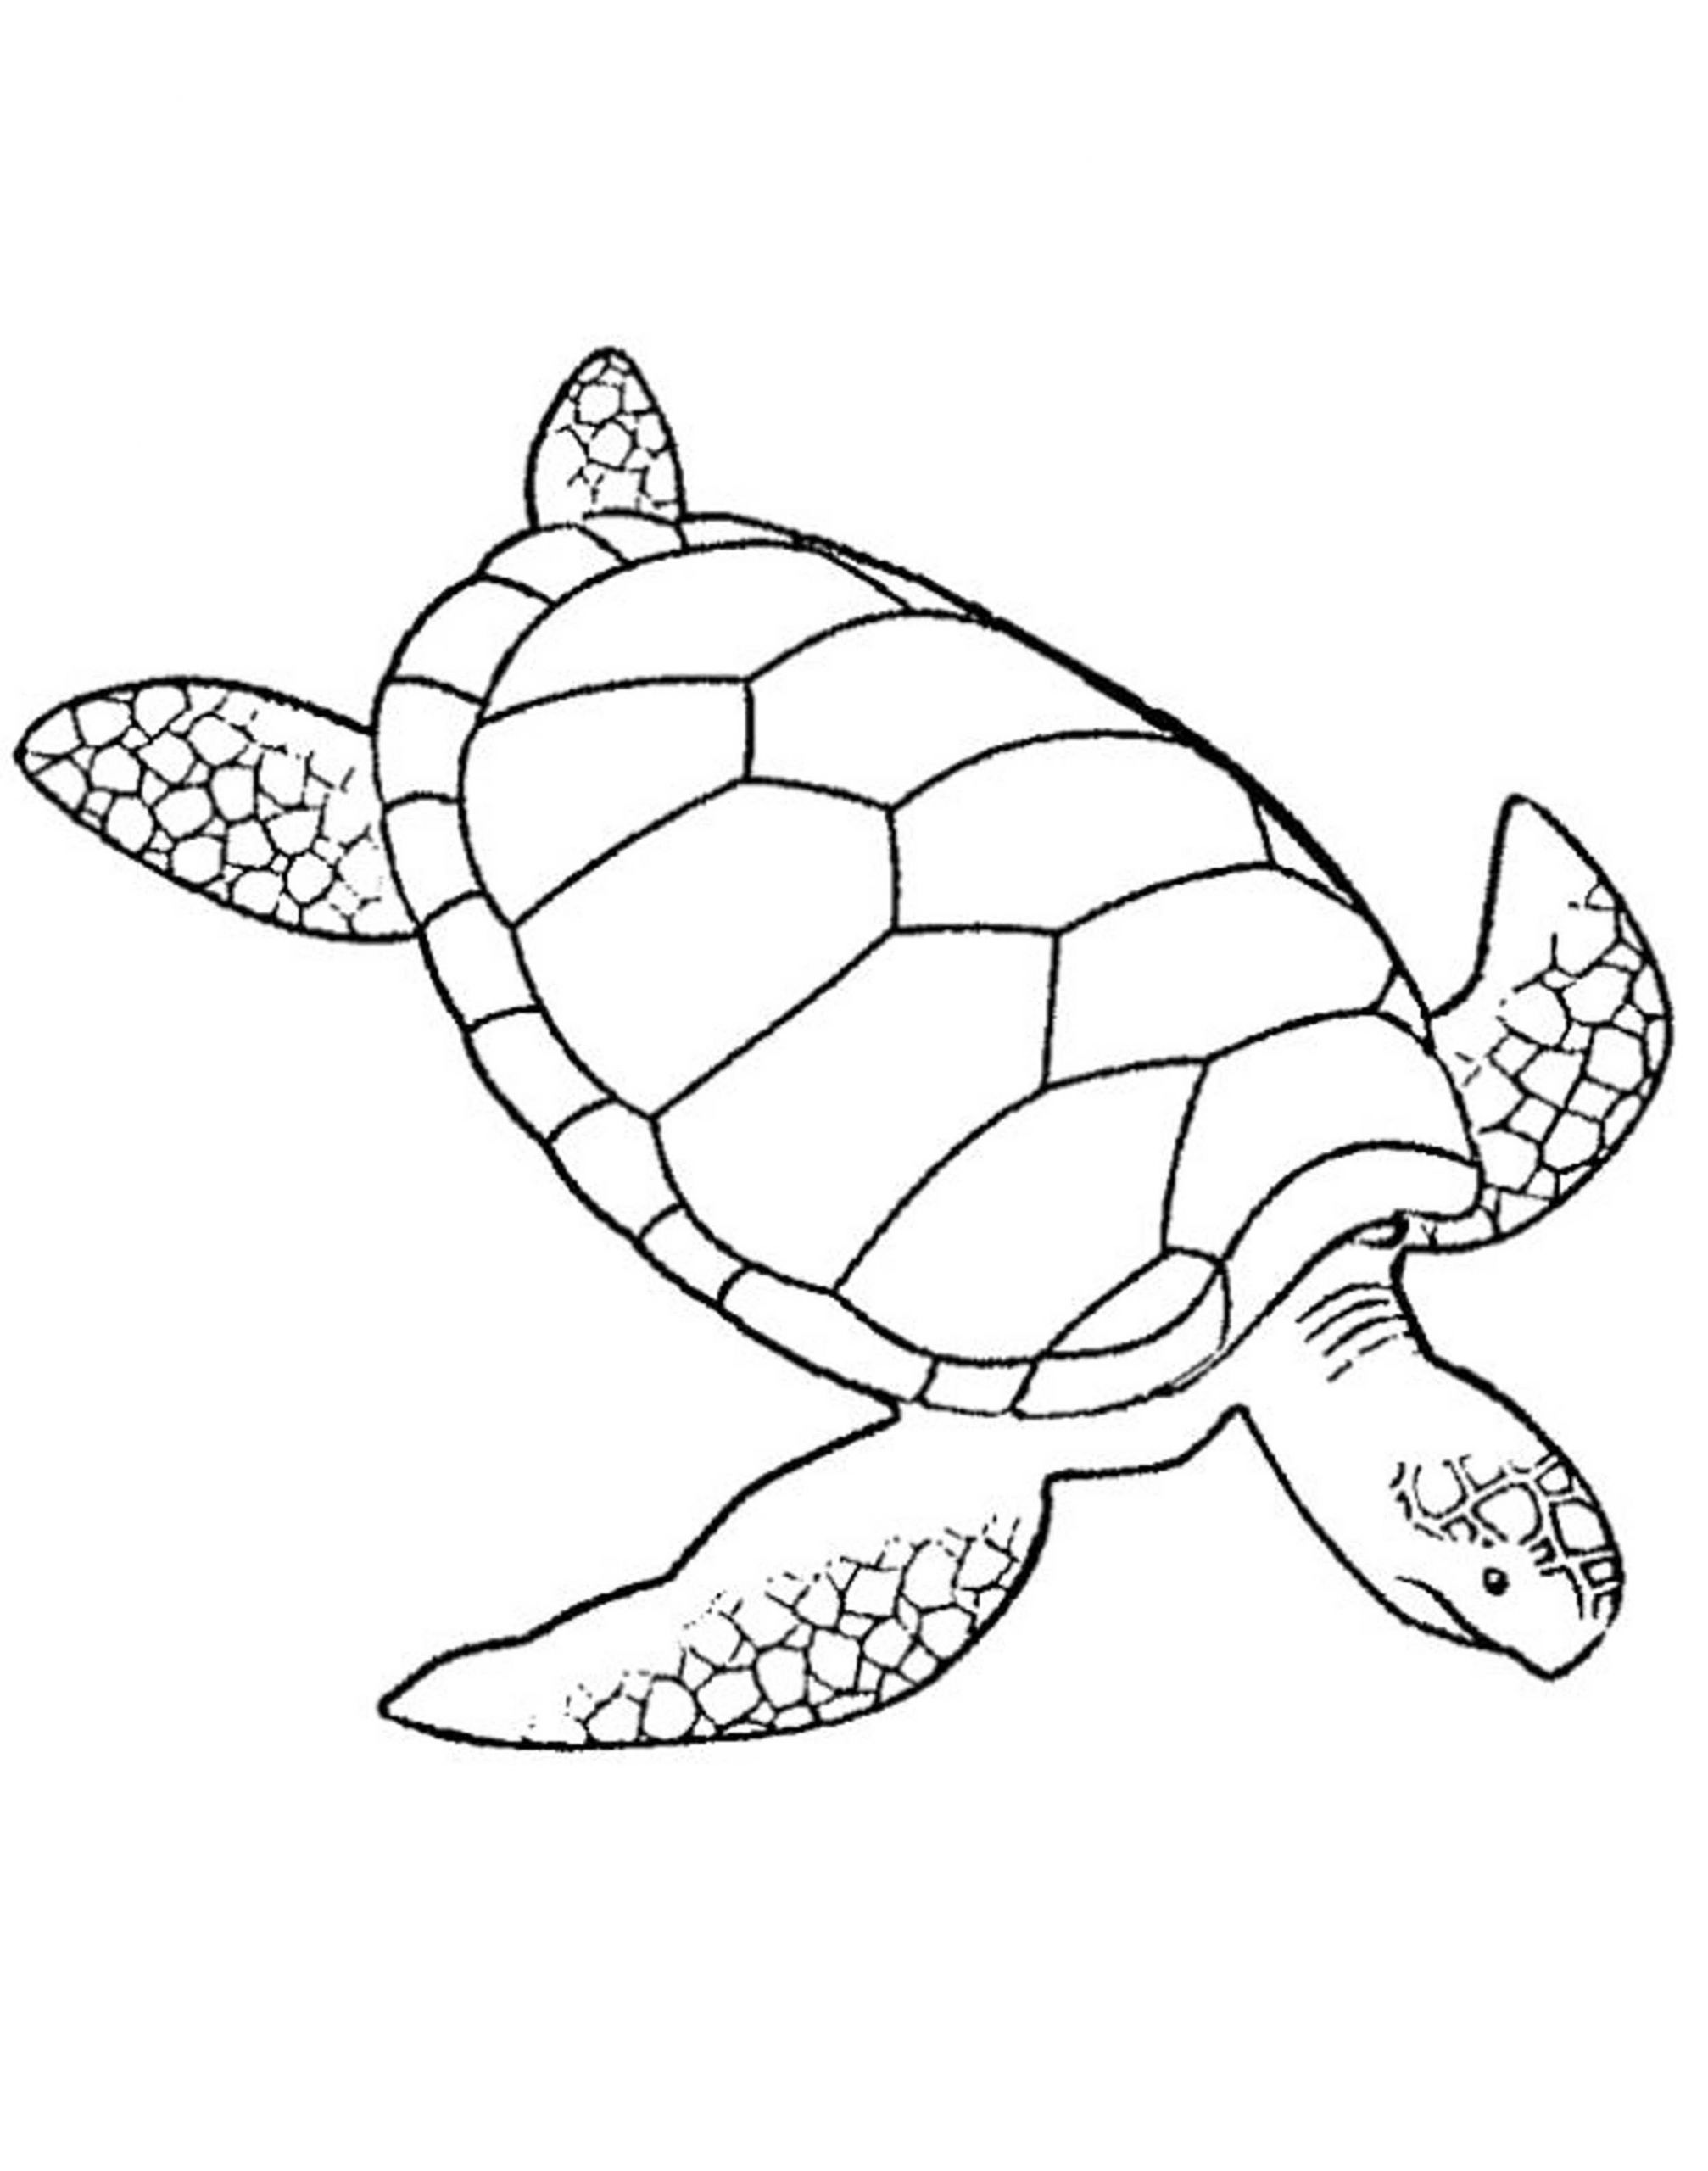 Turtle Coloring Pages Printable
 Print & Download Turtle Coloring Pages as the